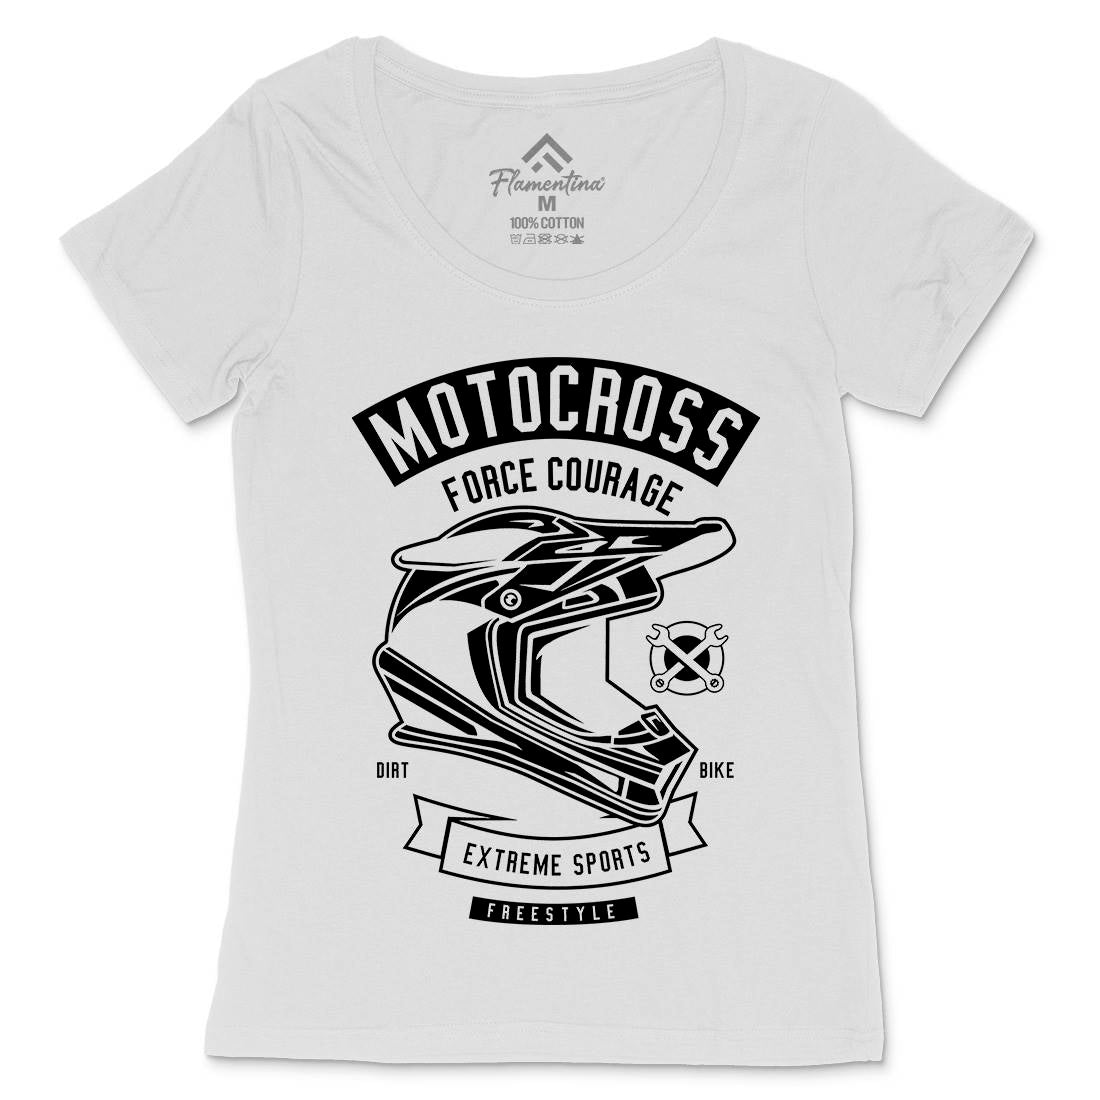 Motocross Force Courage Womens Scoop Neck T-Shirt Motorcycles B576